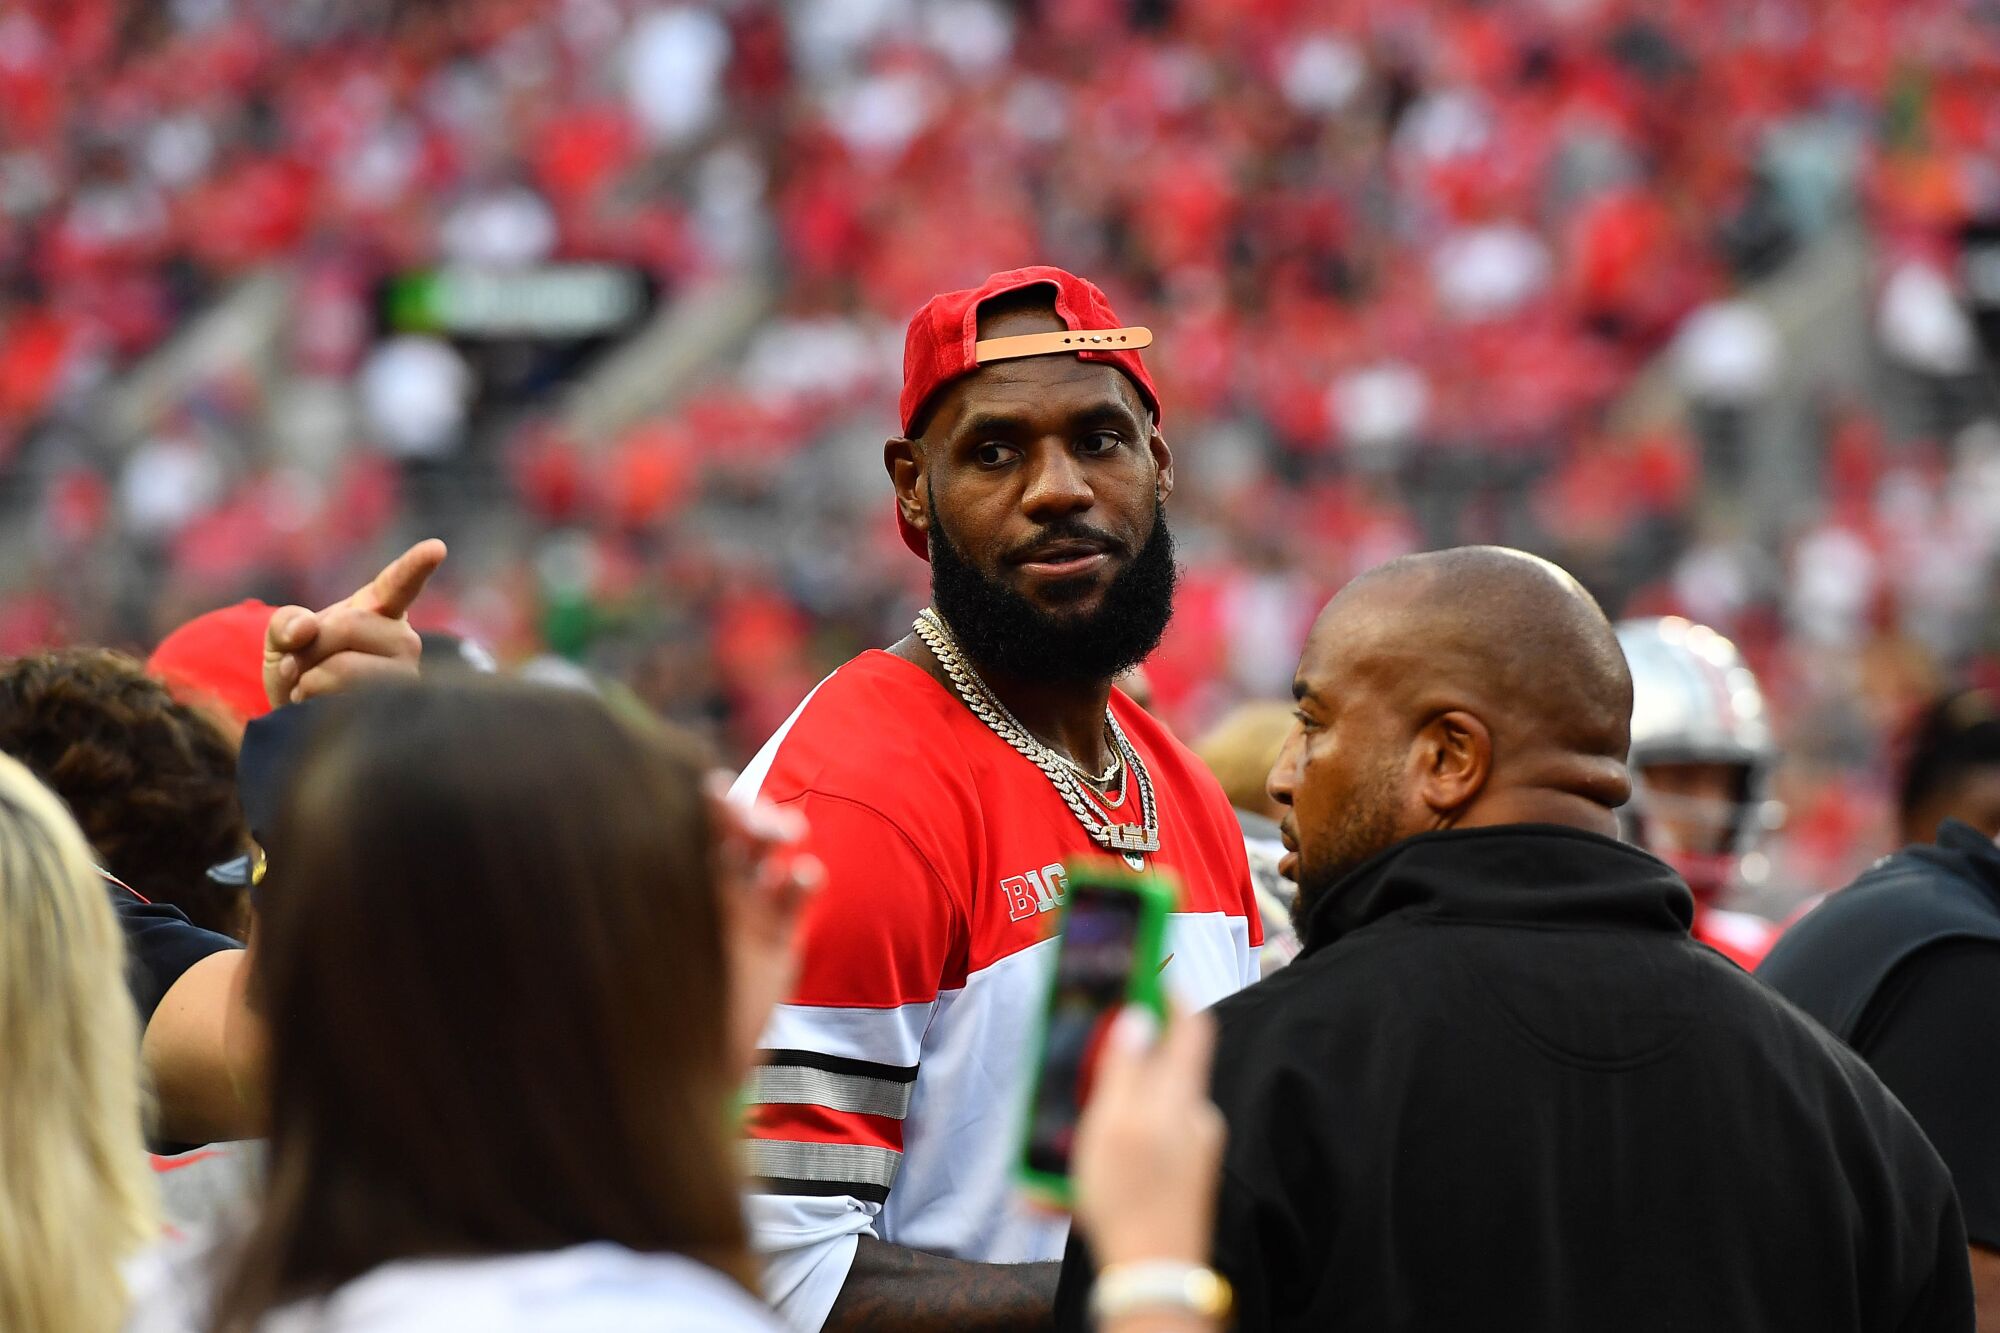 LeBron James attends a game between Notre Dame and Ohio State in Columbus, Ohio, on Sept. 3.